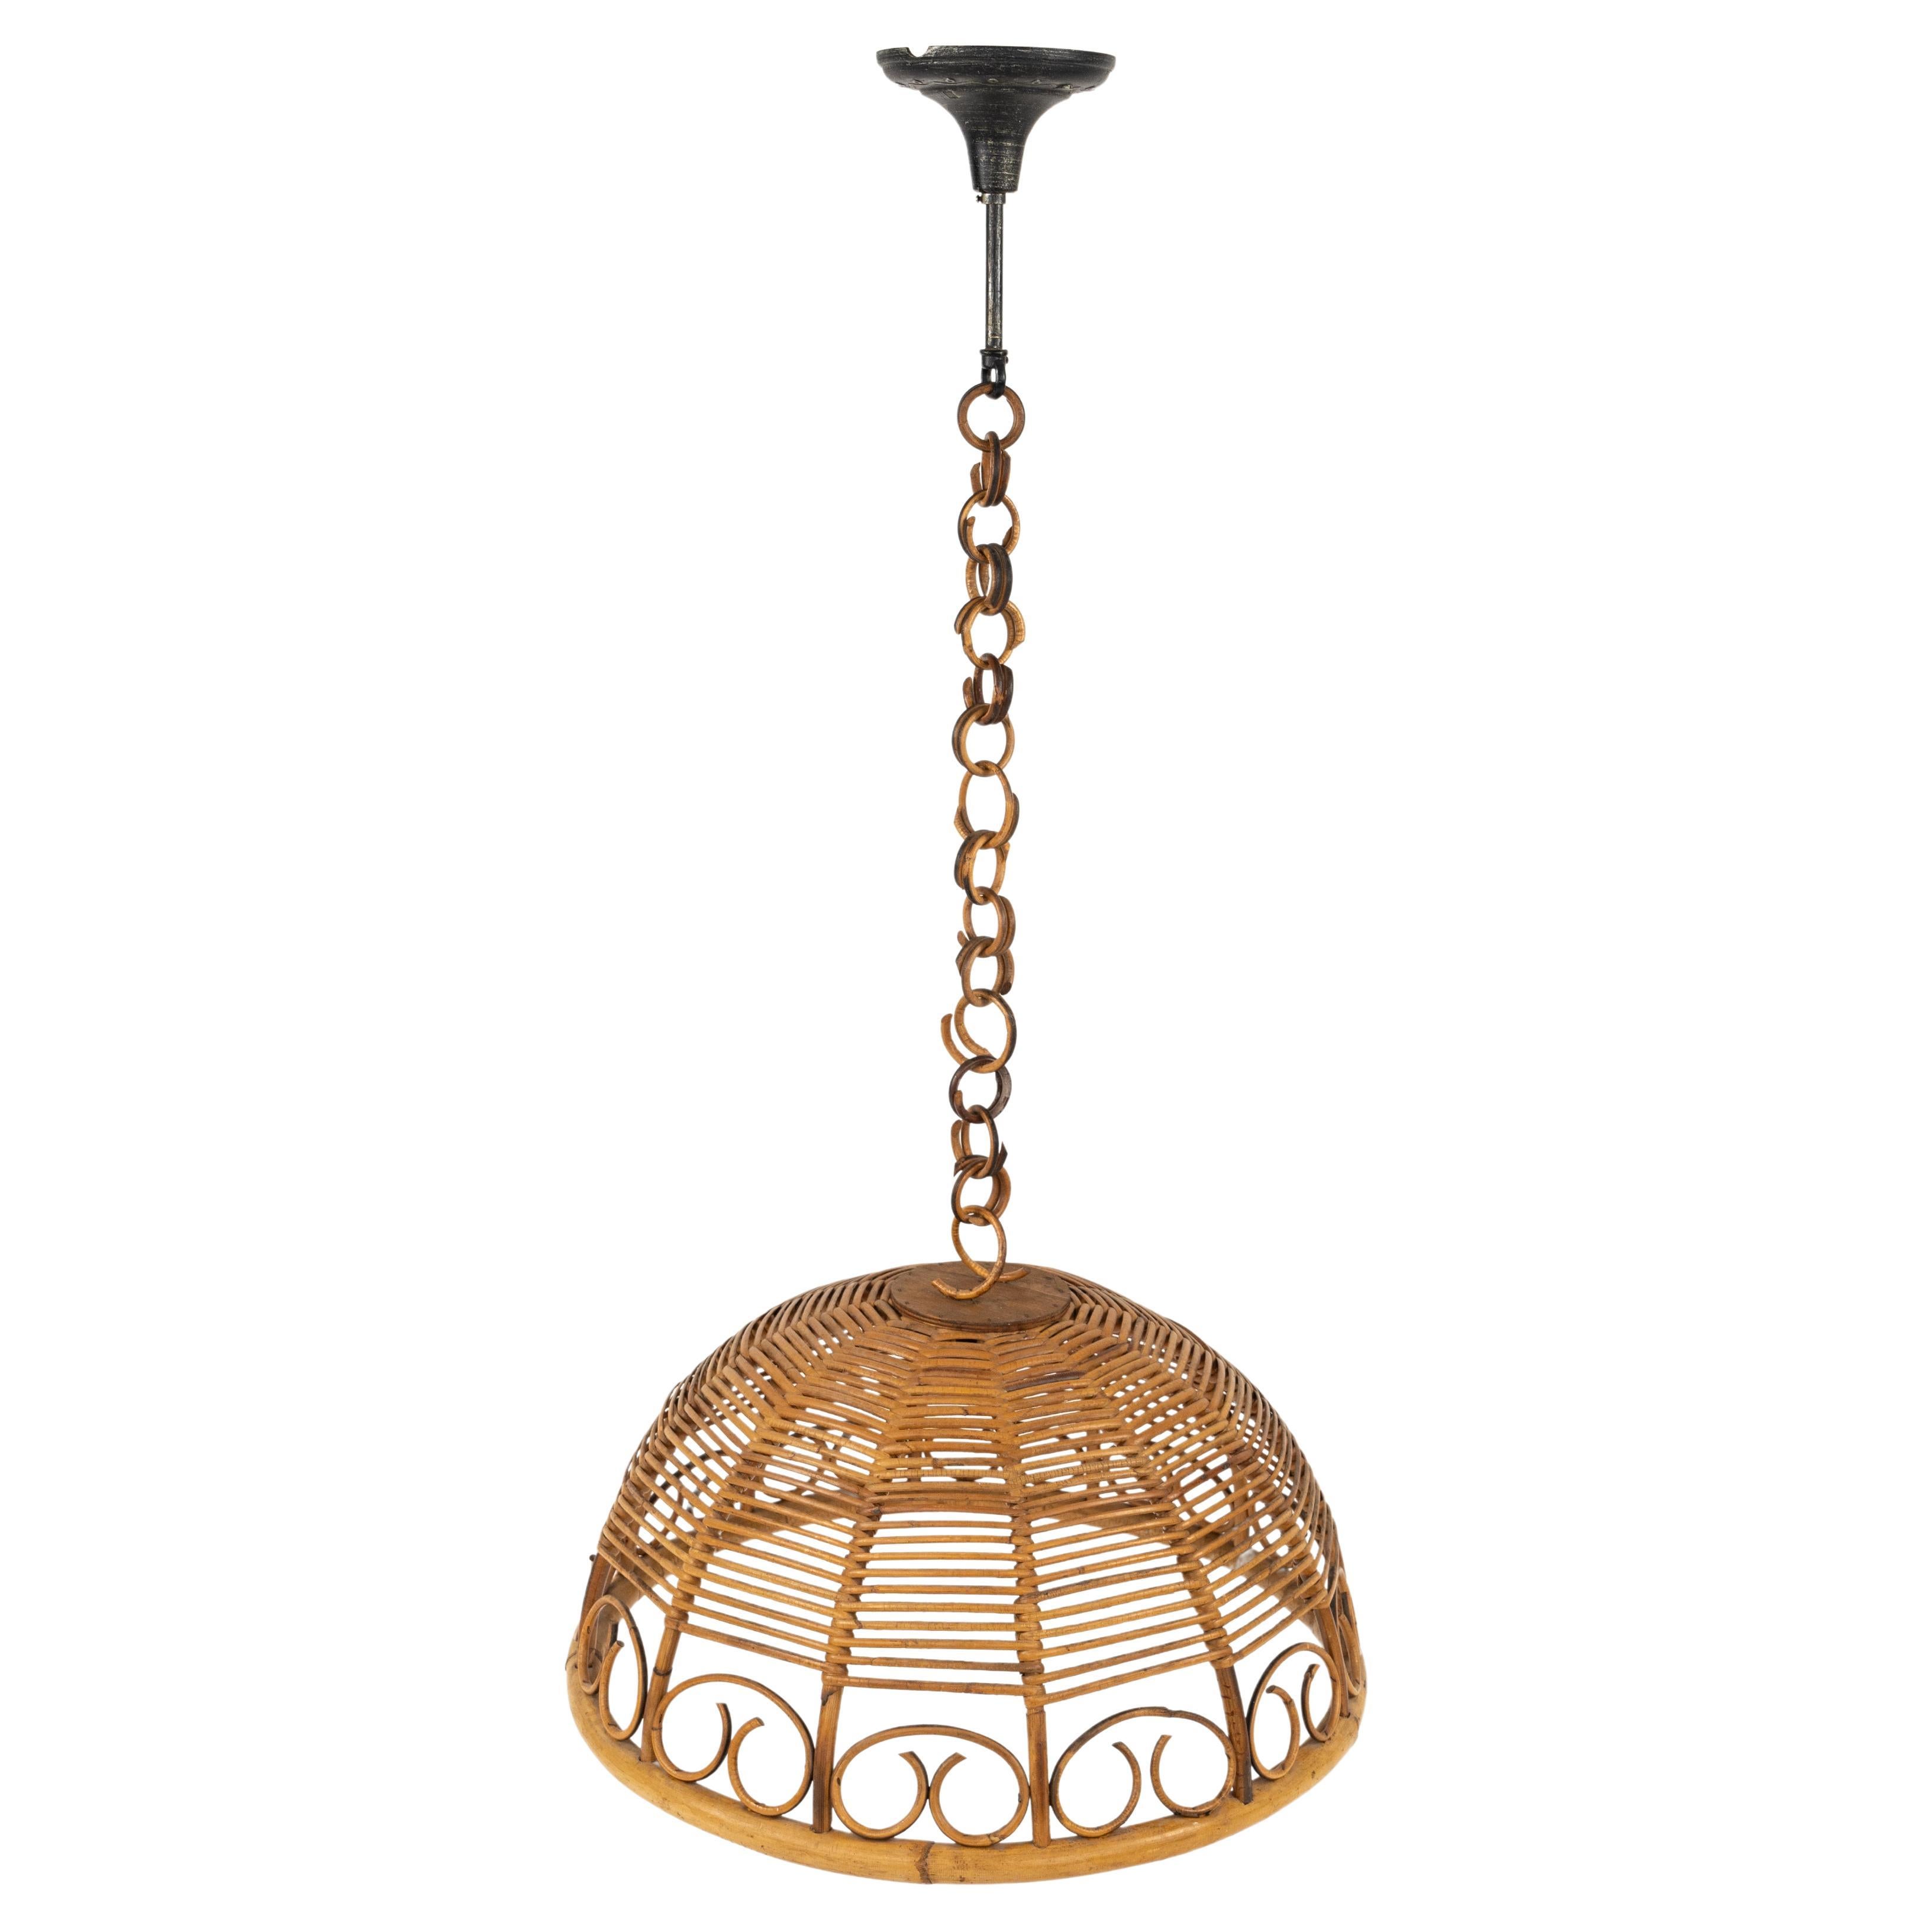 Midcentury Rattan and Bamboo Chandelier Pendant, Italy 1960s For Sale